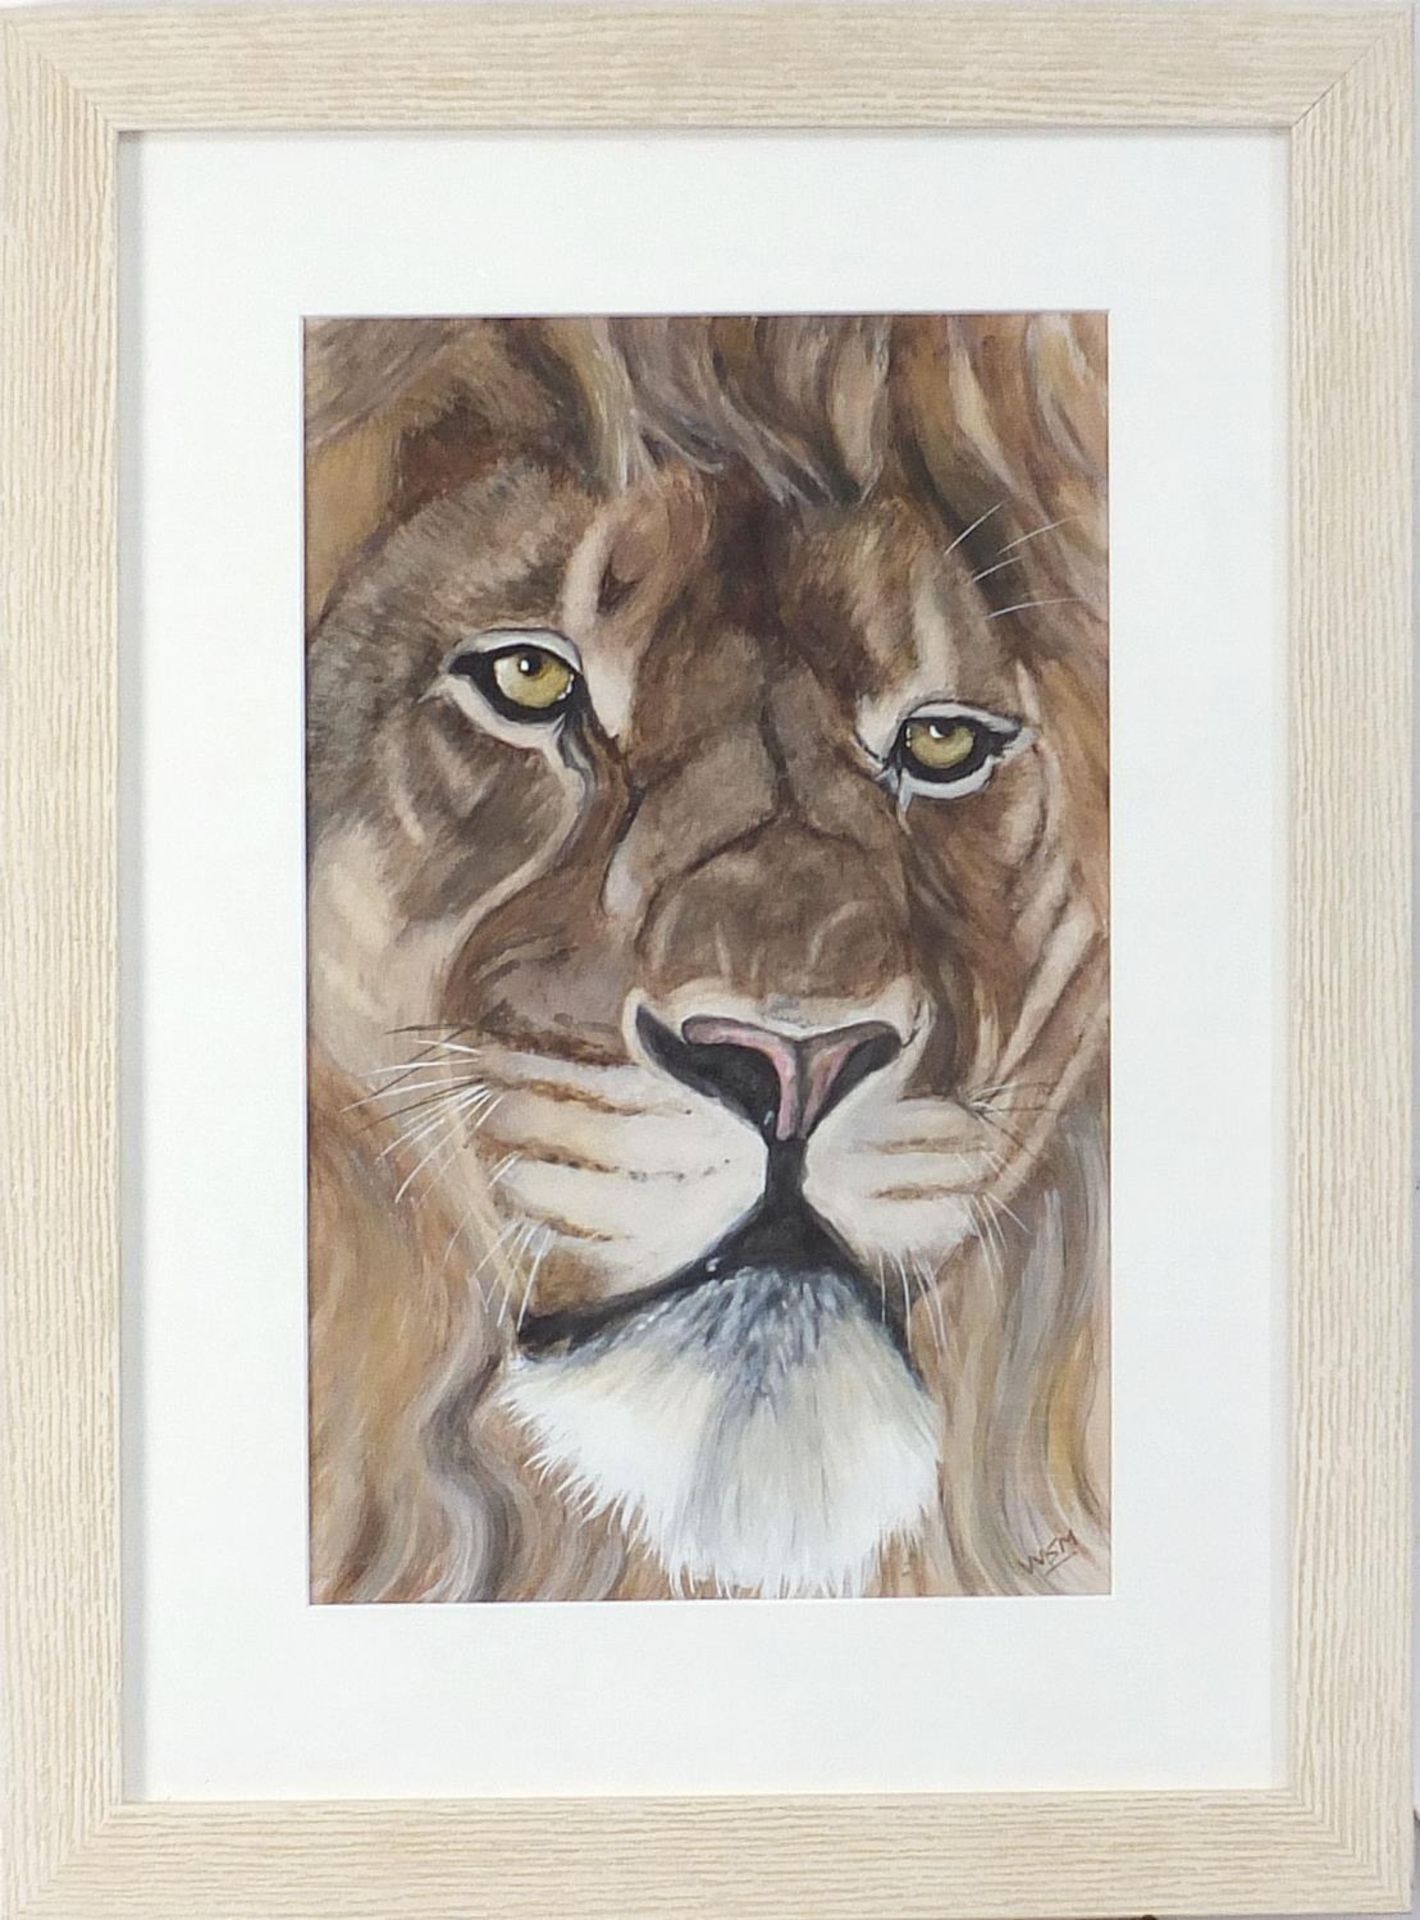 Will Smith - Portrait of a lion, watercolour, monogrammed, mounted, framed and glazed, 41cm x 25.5cm - Image 2 of 4